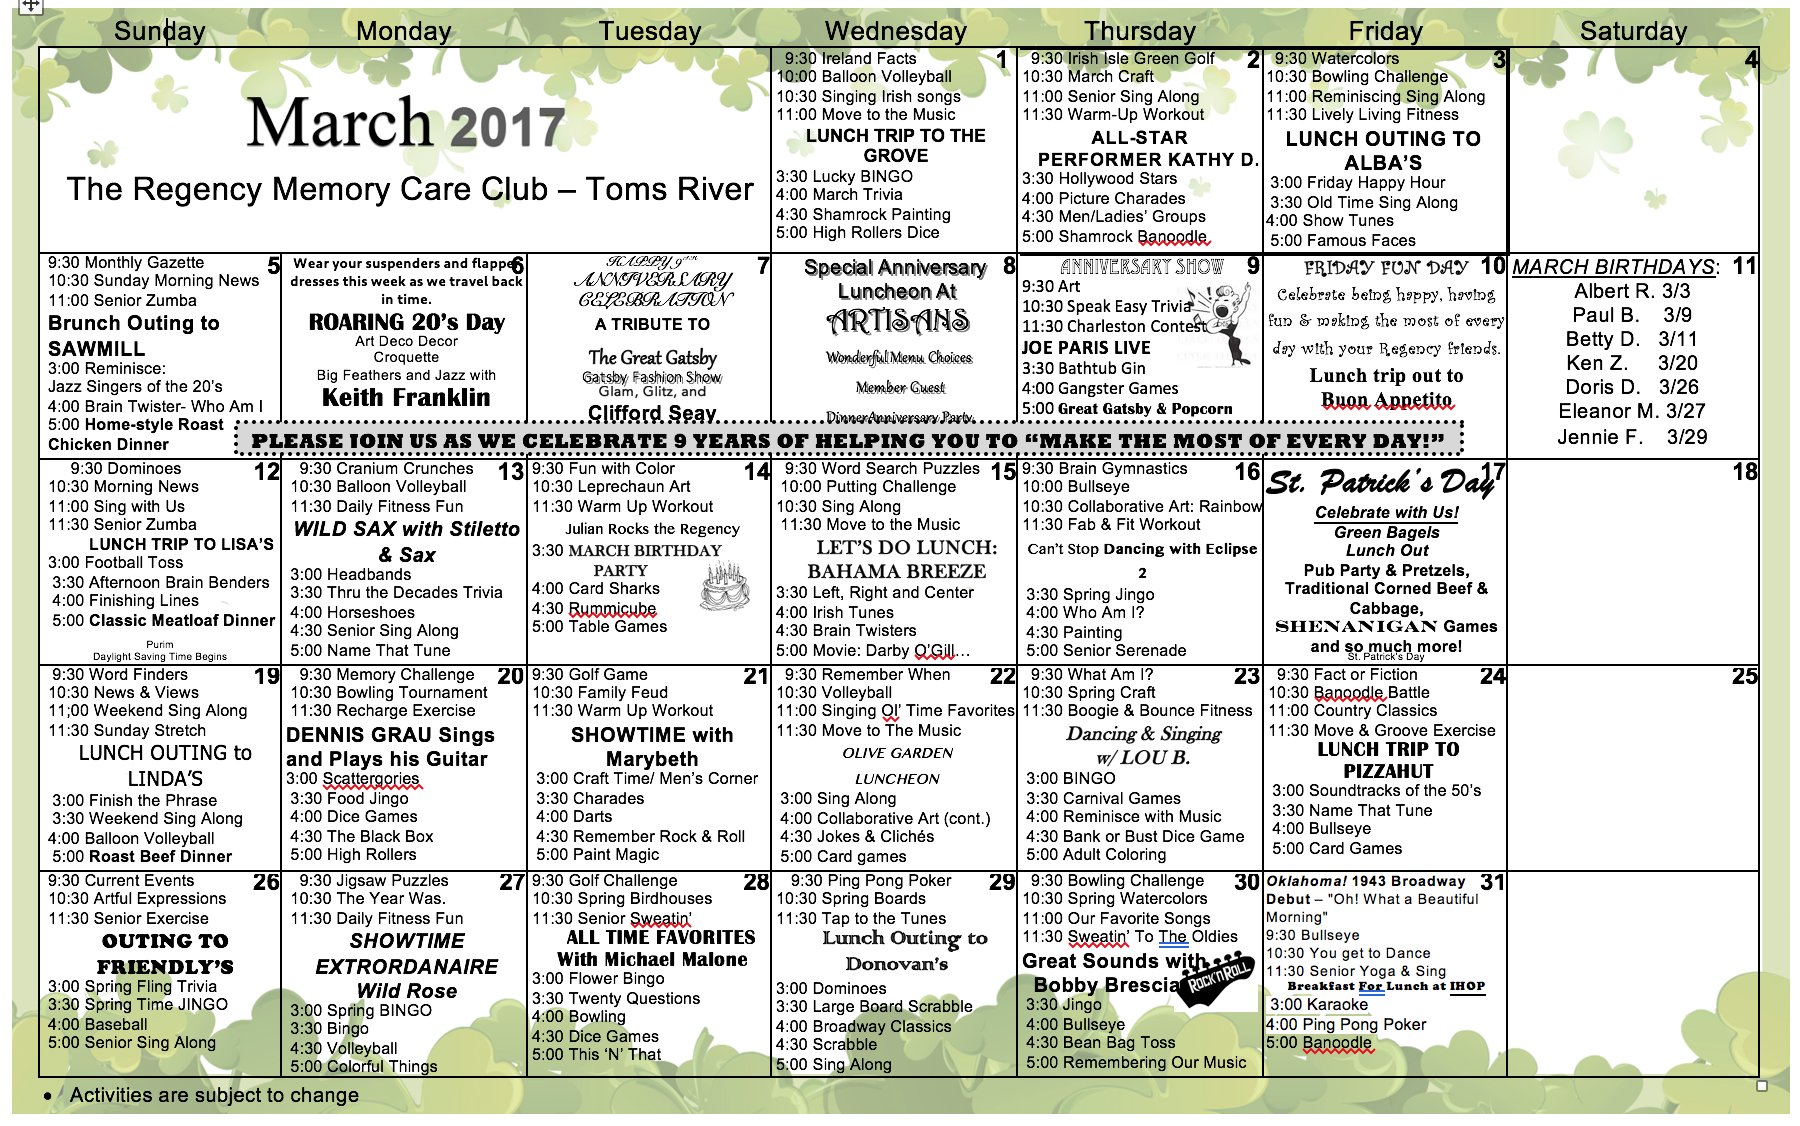 Toms River March 2017 Events